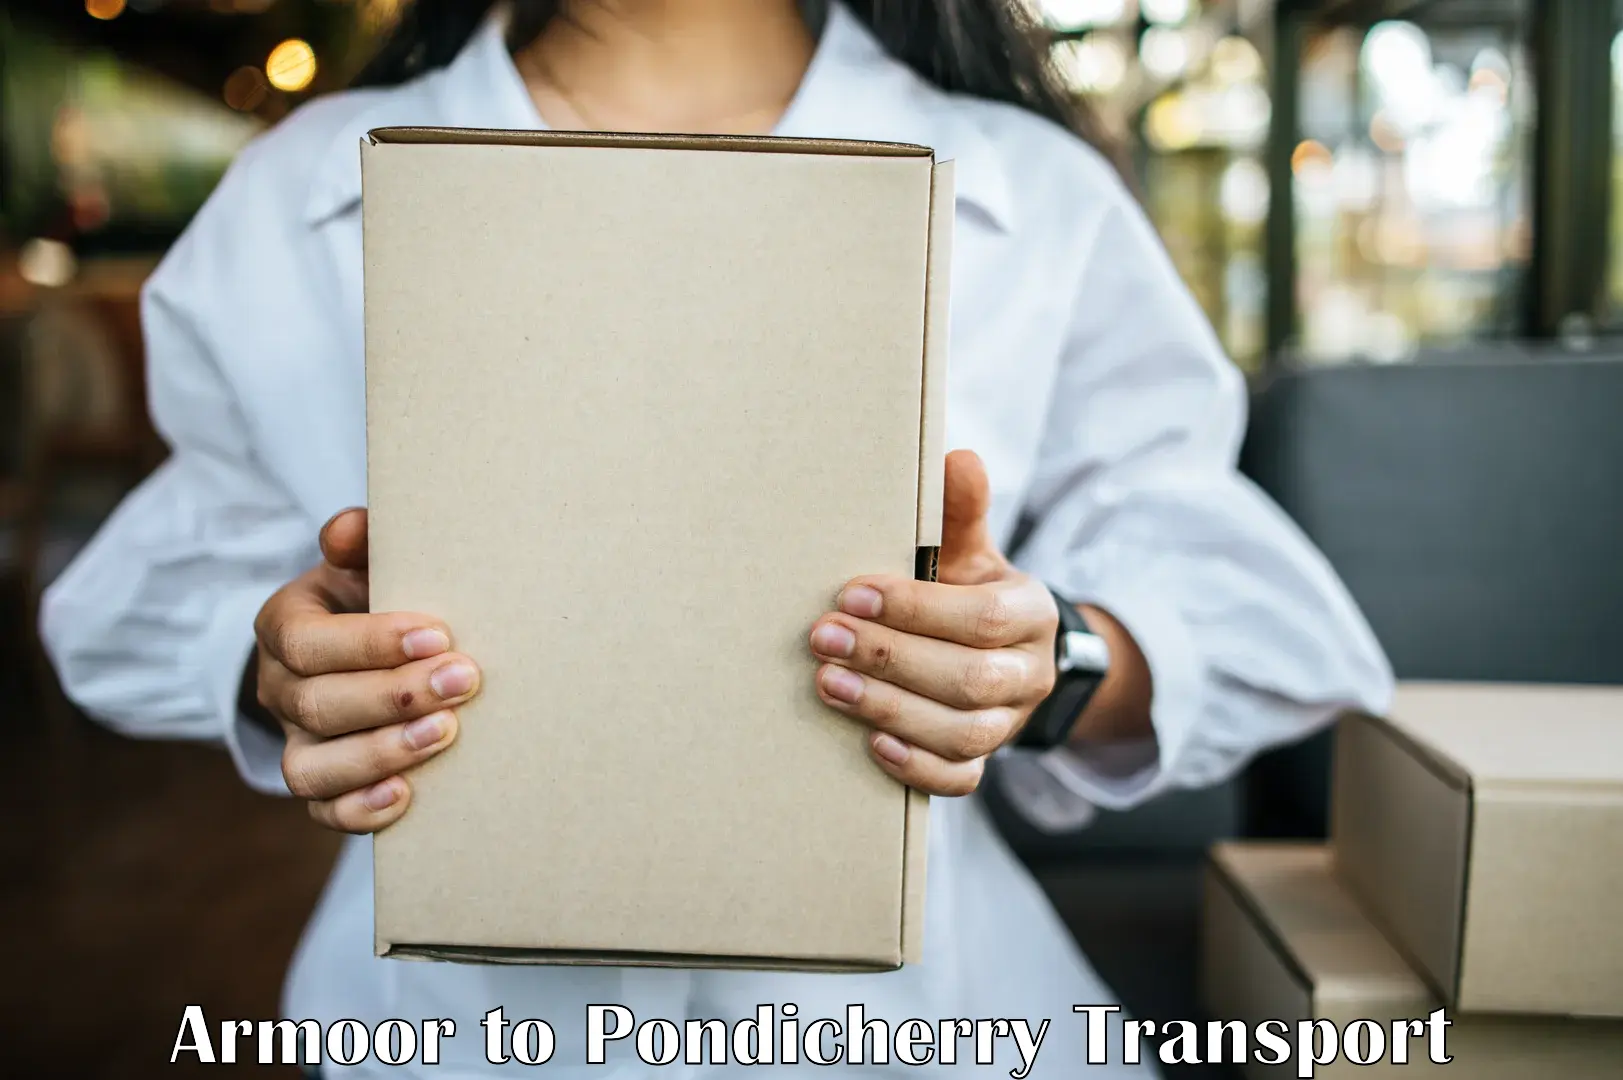 Road transport online services Armoor to Pondicherry